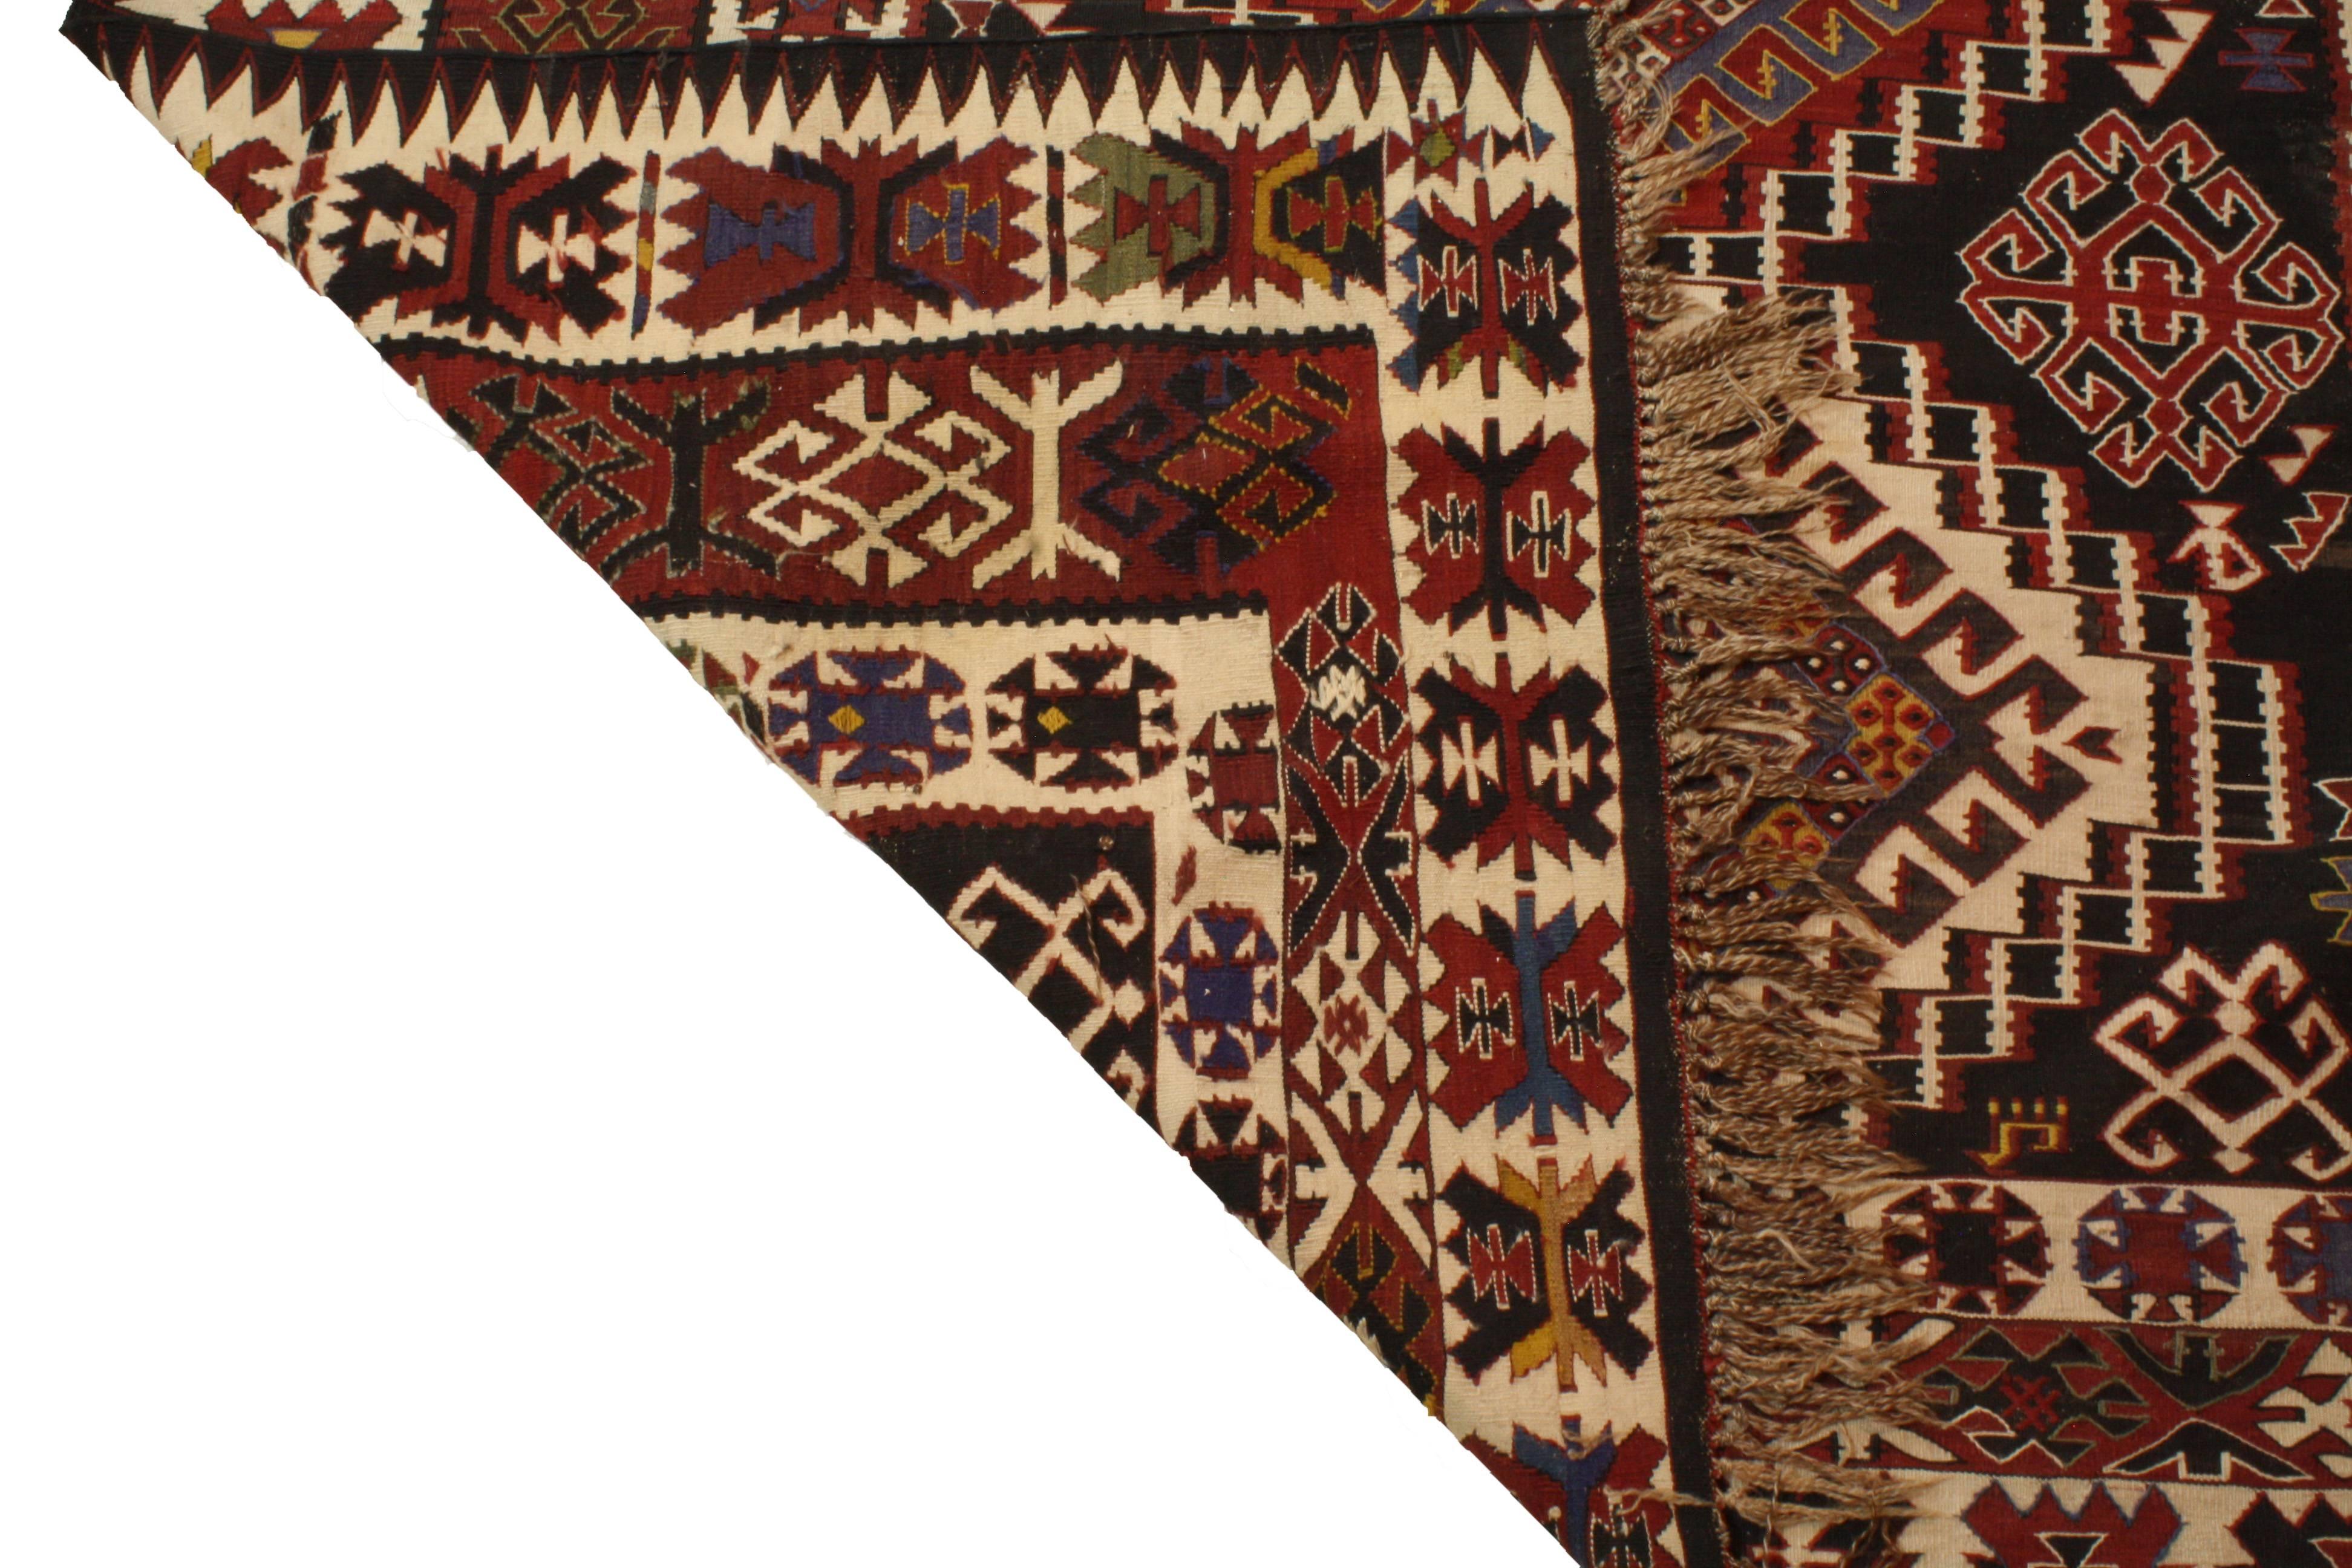 Rugs from the mountainous Caucasus region (now part of Russia) are prized for their superb wool, colors and exceptional weave. This rug was most likely a wedding gift because it is so well preserved and the colors are vivid and tightly woven. It was